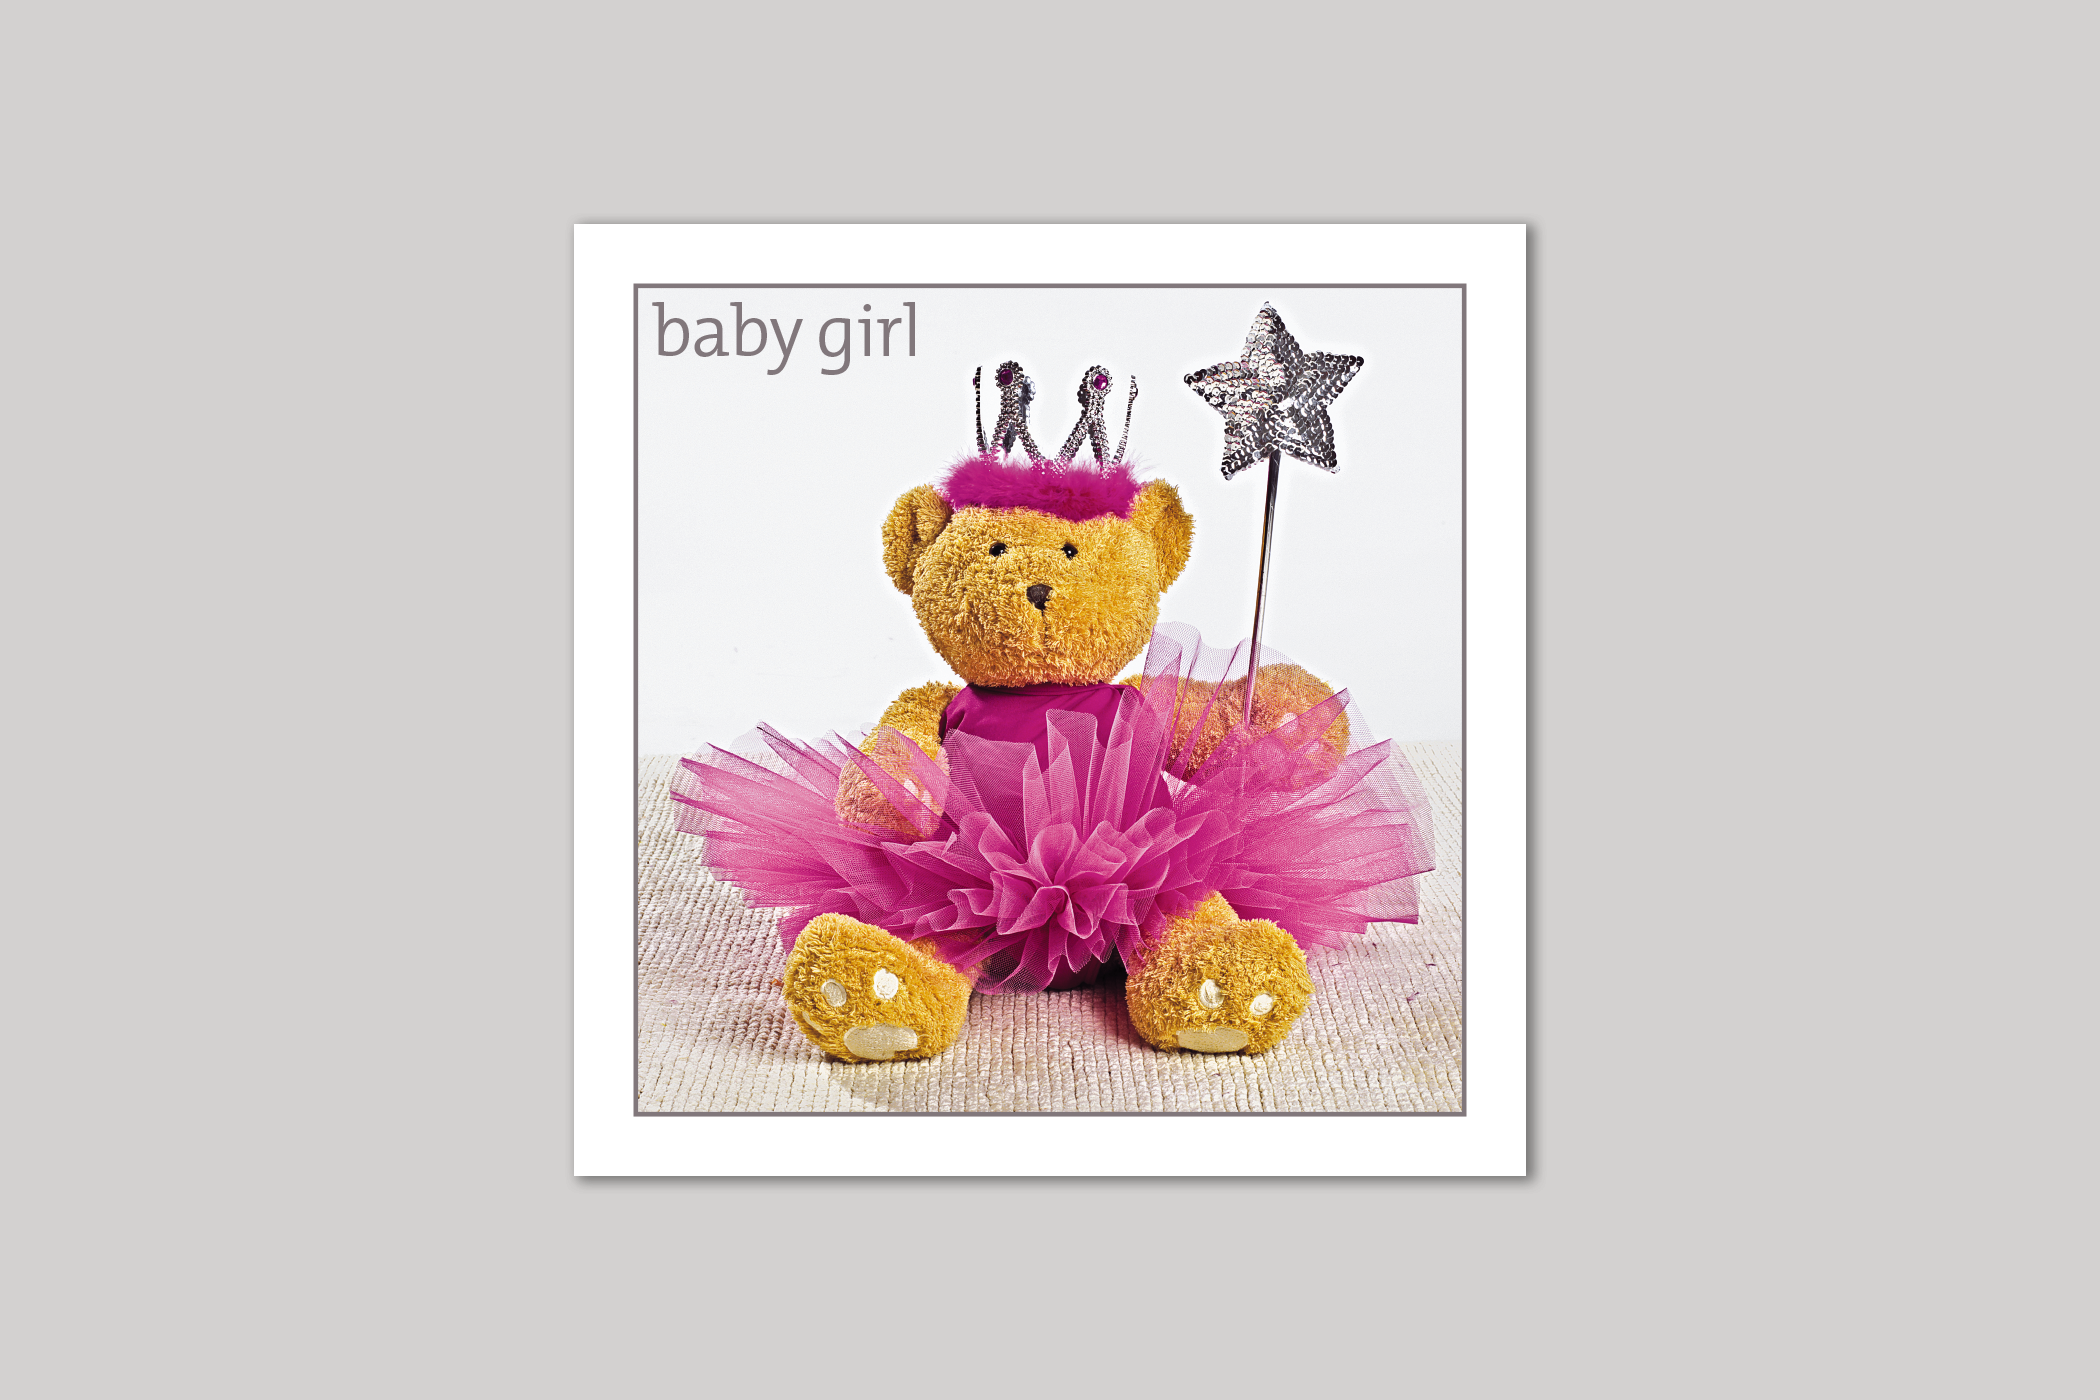 Teddy Tutu new baby girl card from Exposure Silver Edition range of greeting cards by Icon.